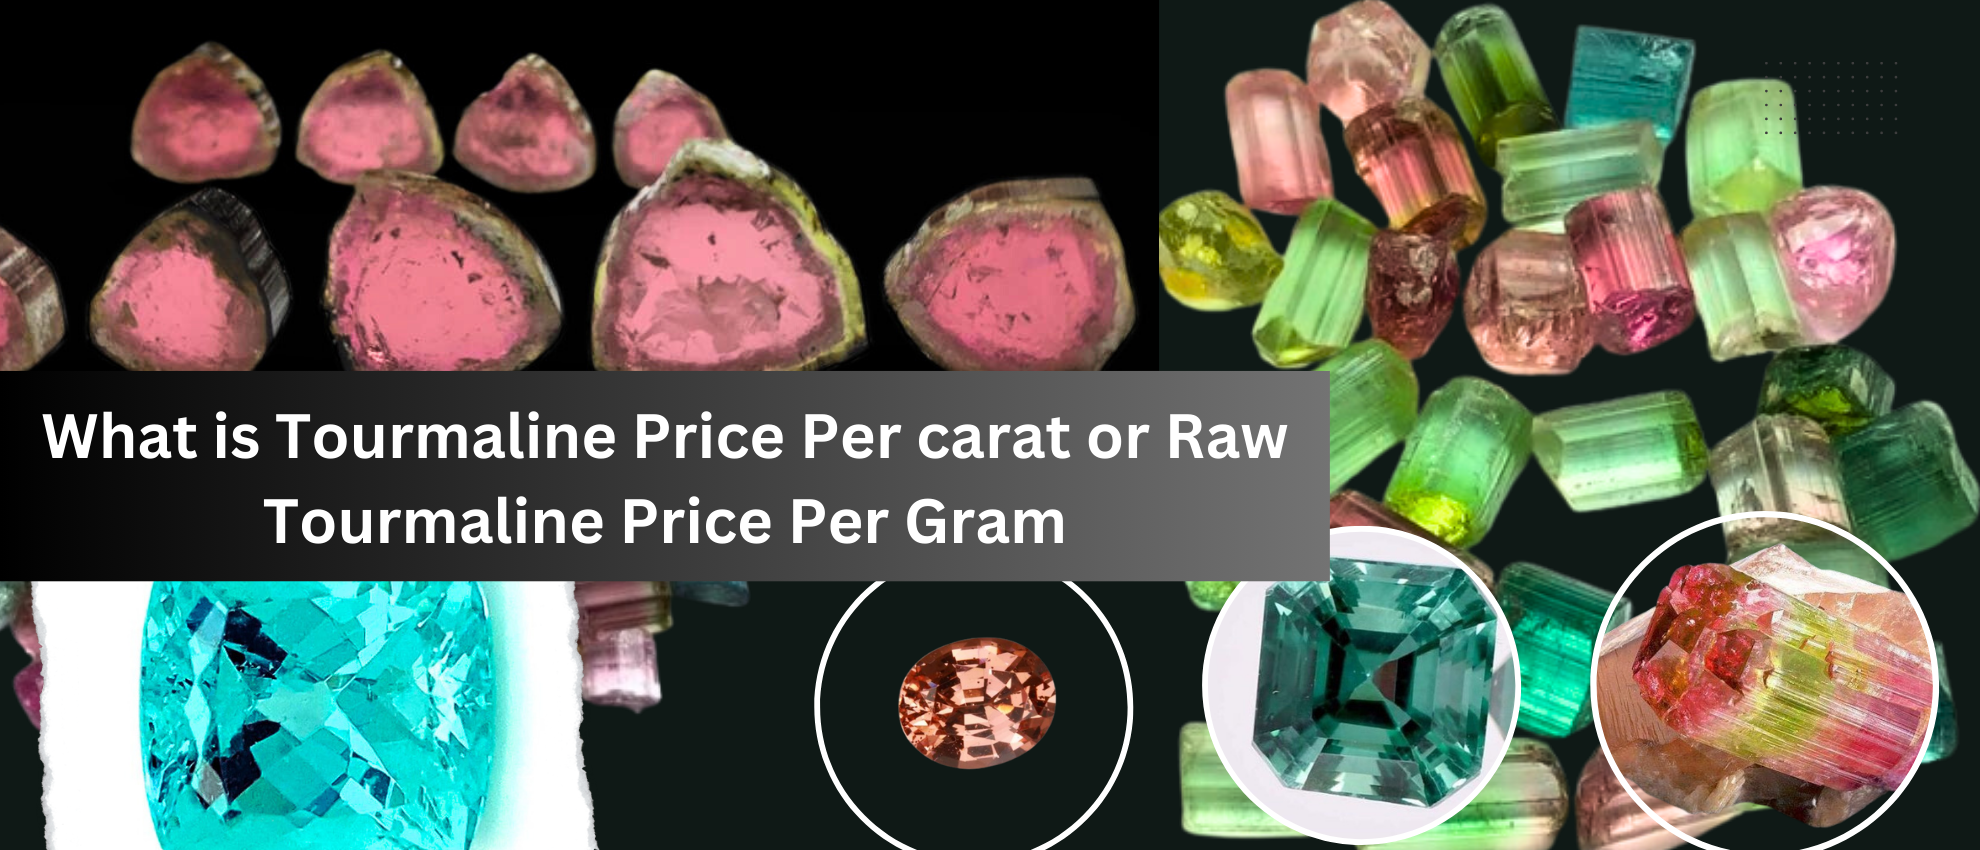 How Valuable is Tourmaline Stone? What is tourmaline price per carat?